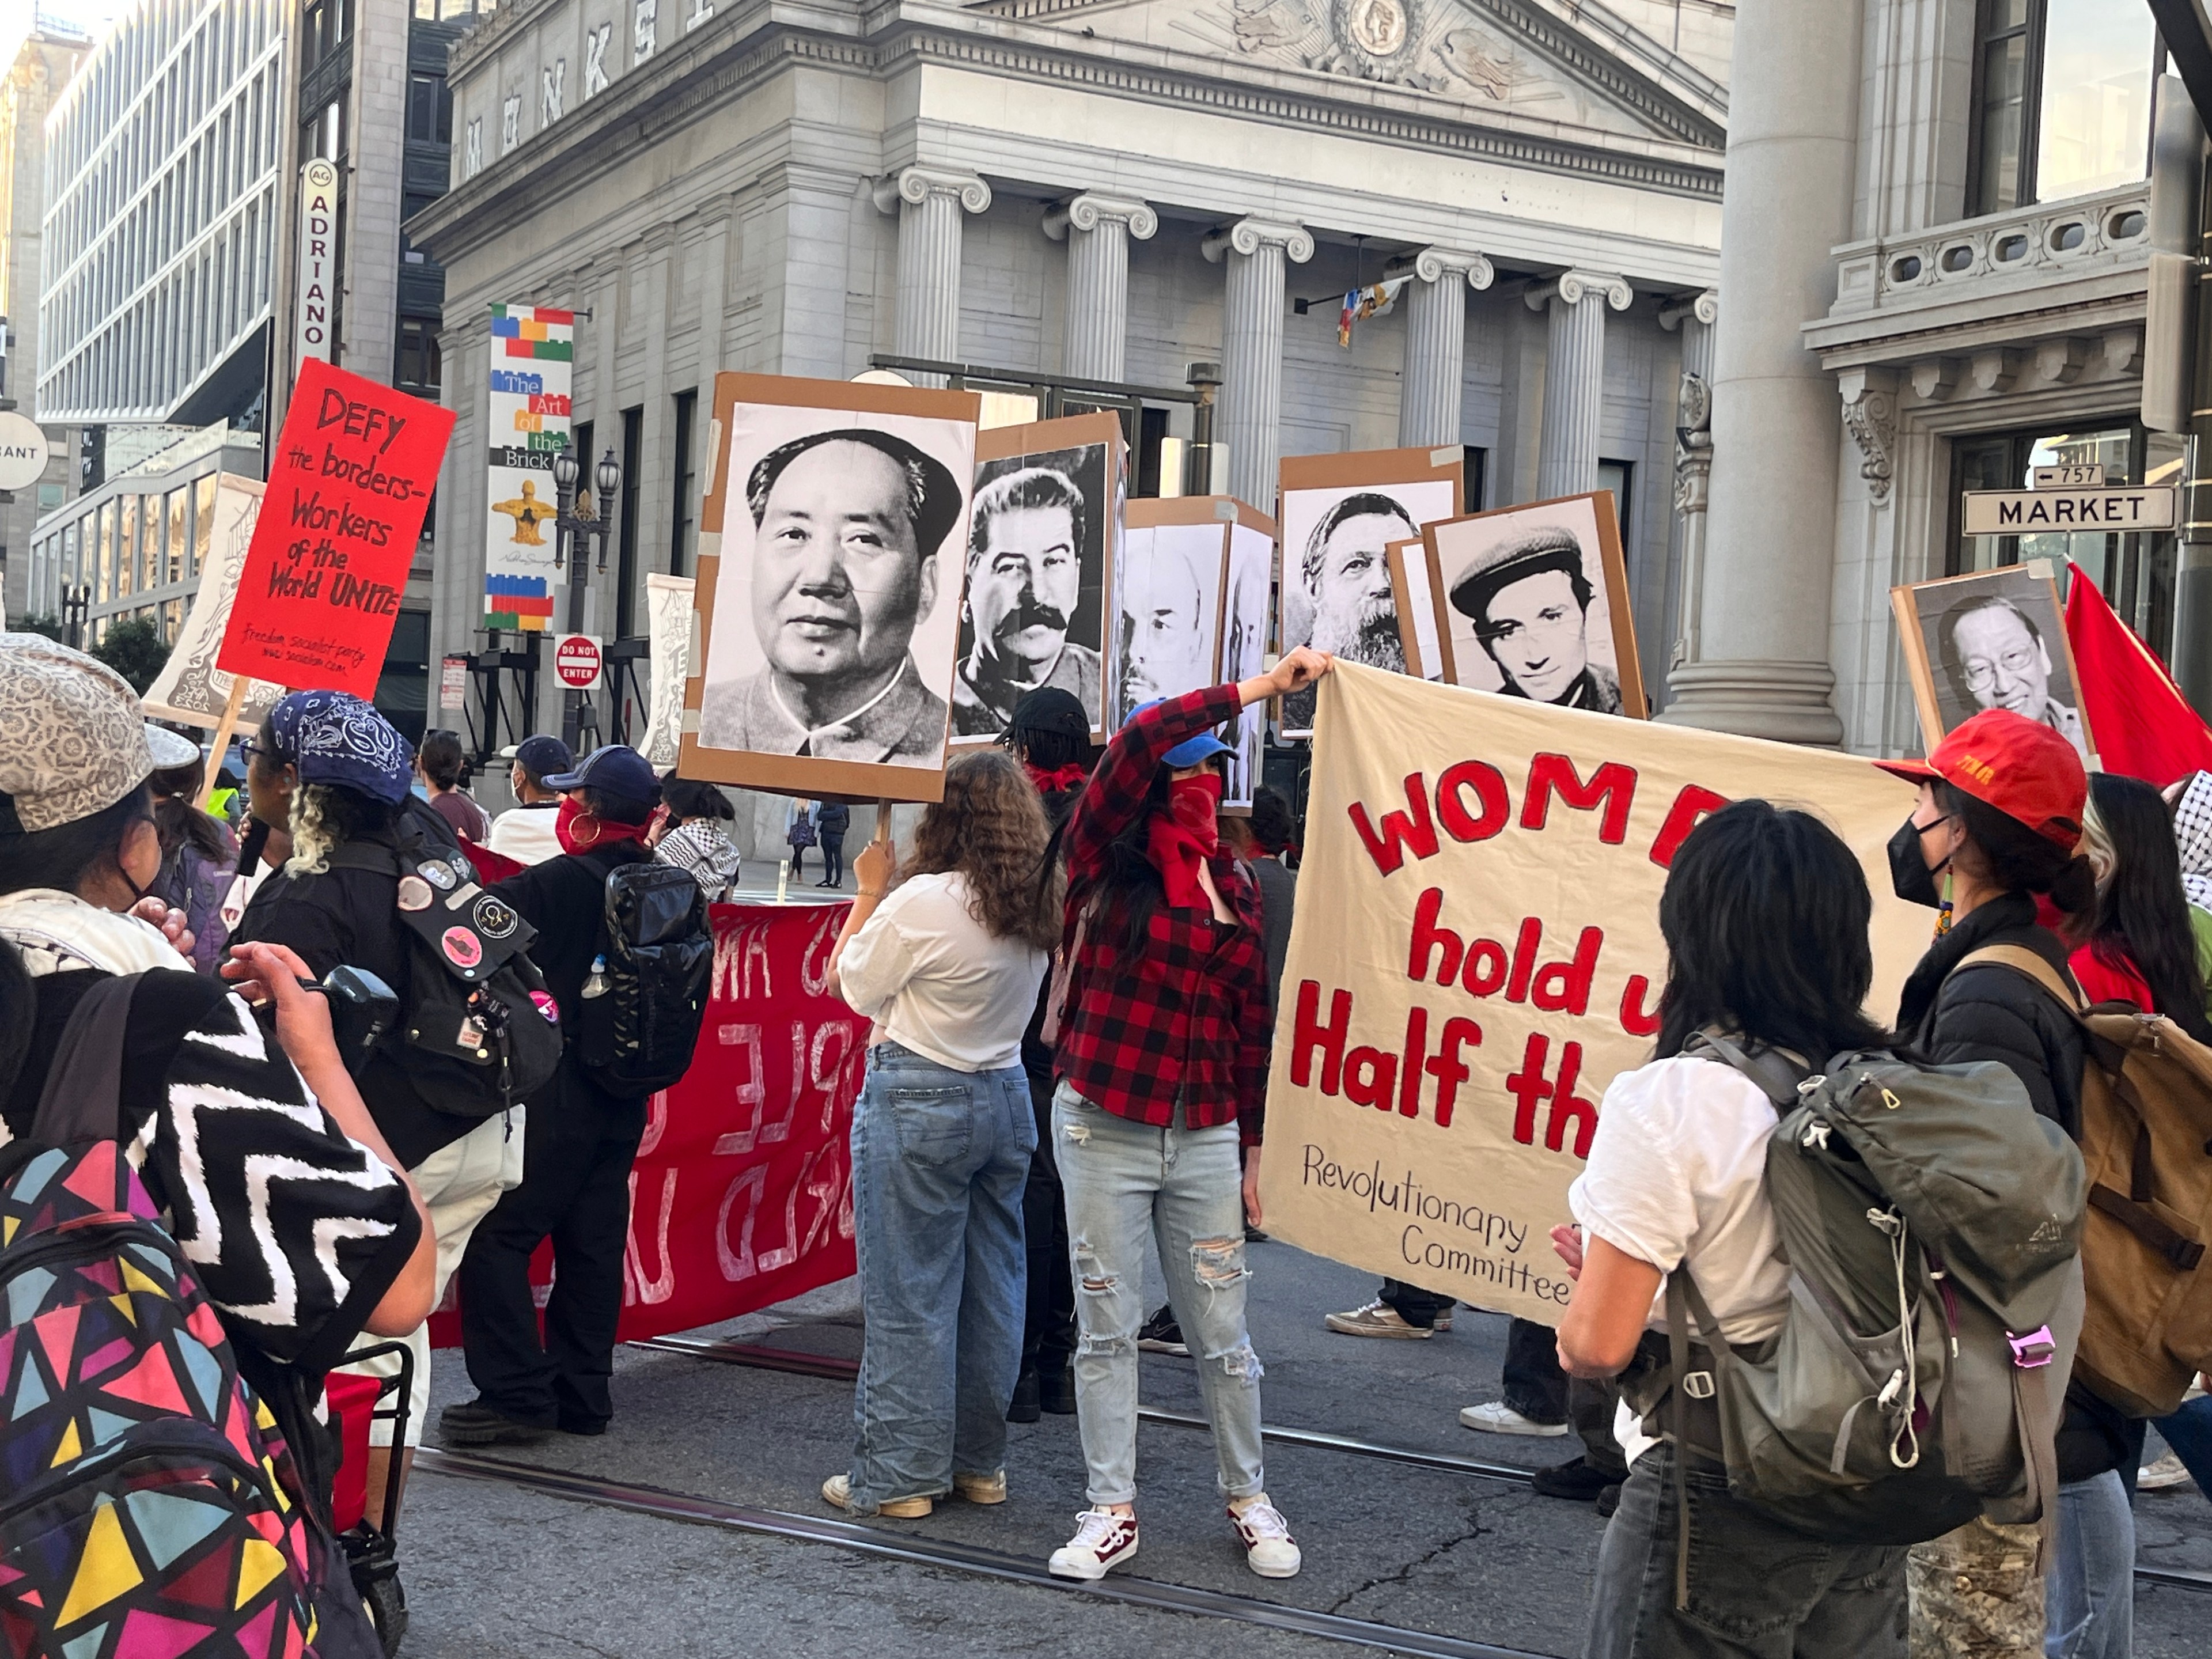 Protesters hold signs, banners and pictures of Mao Tse-tung, Marx and Lenin.